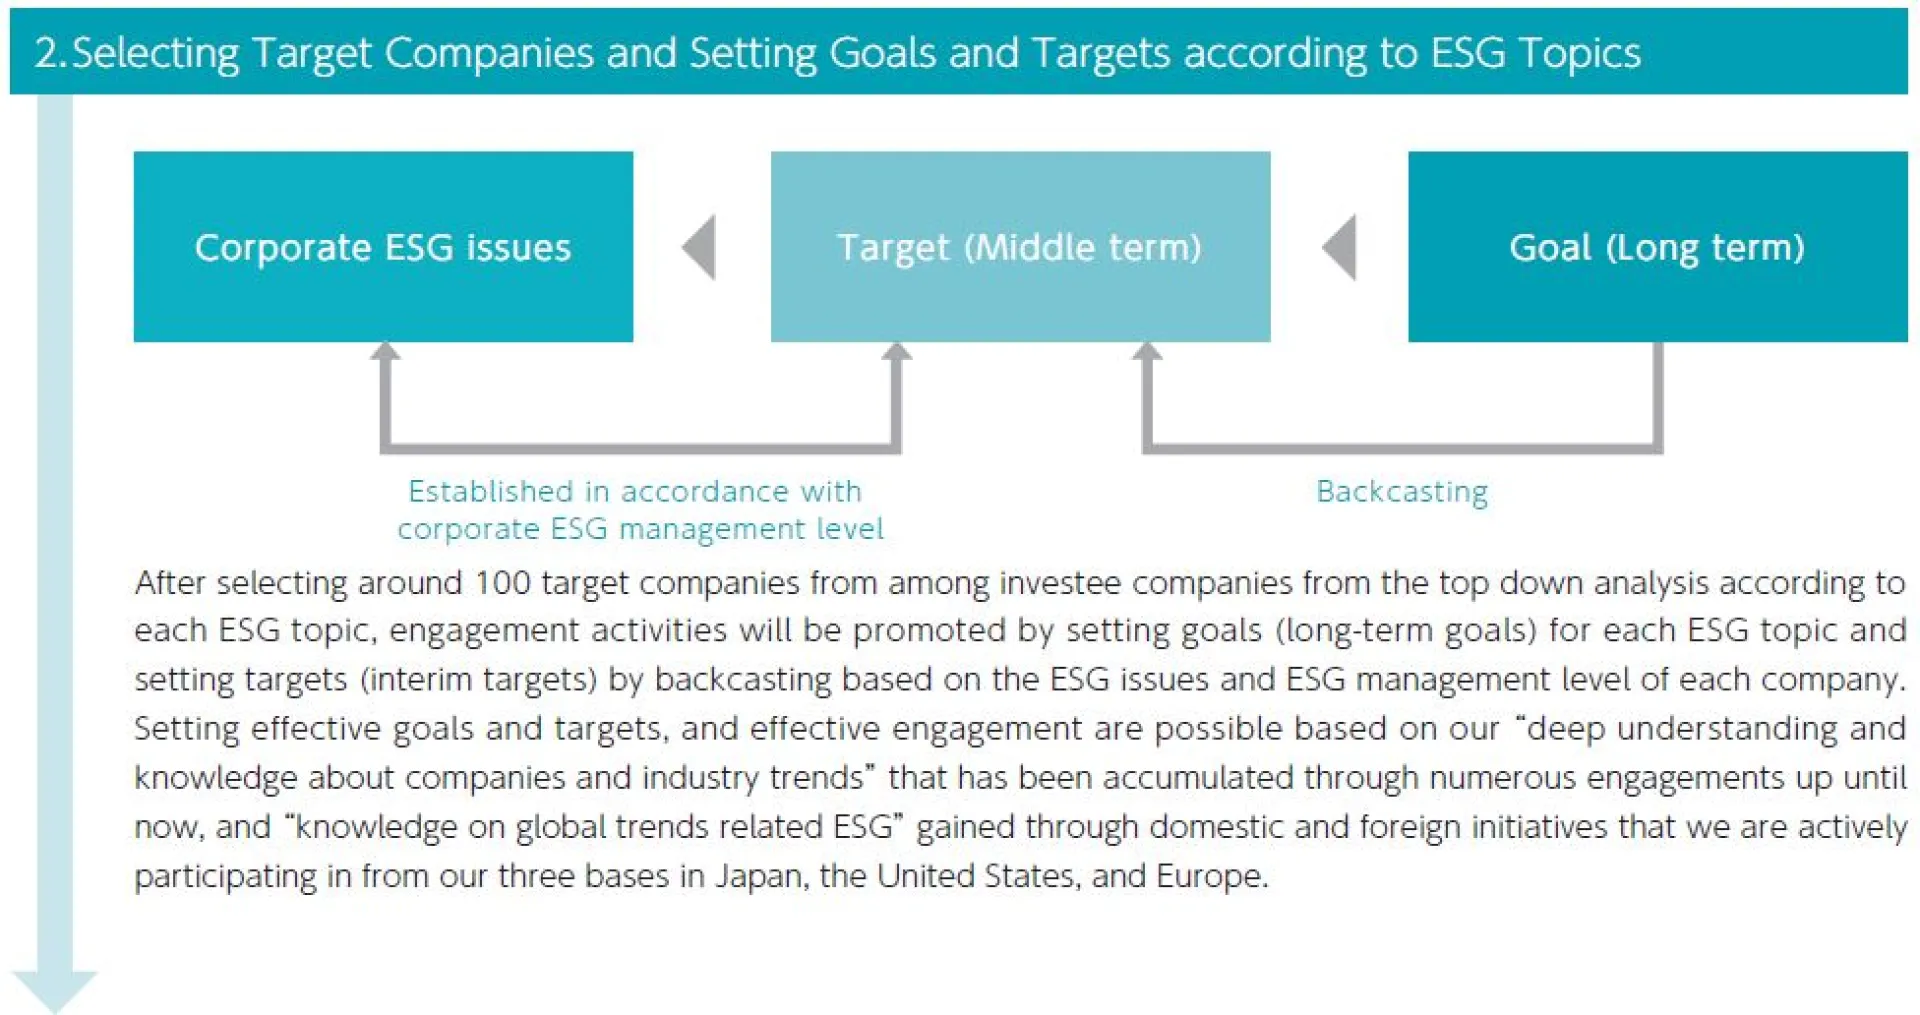 2) Selecting Target Companies and Setting Goals